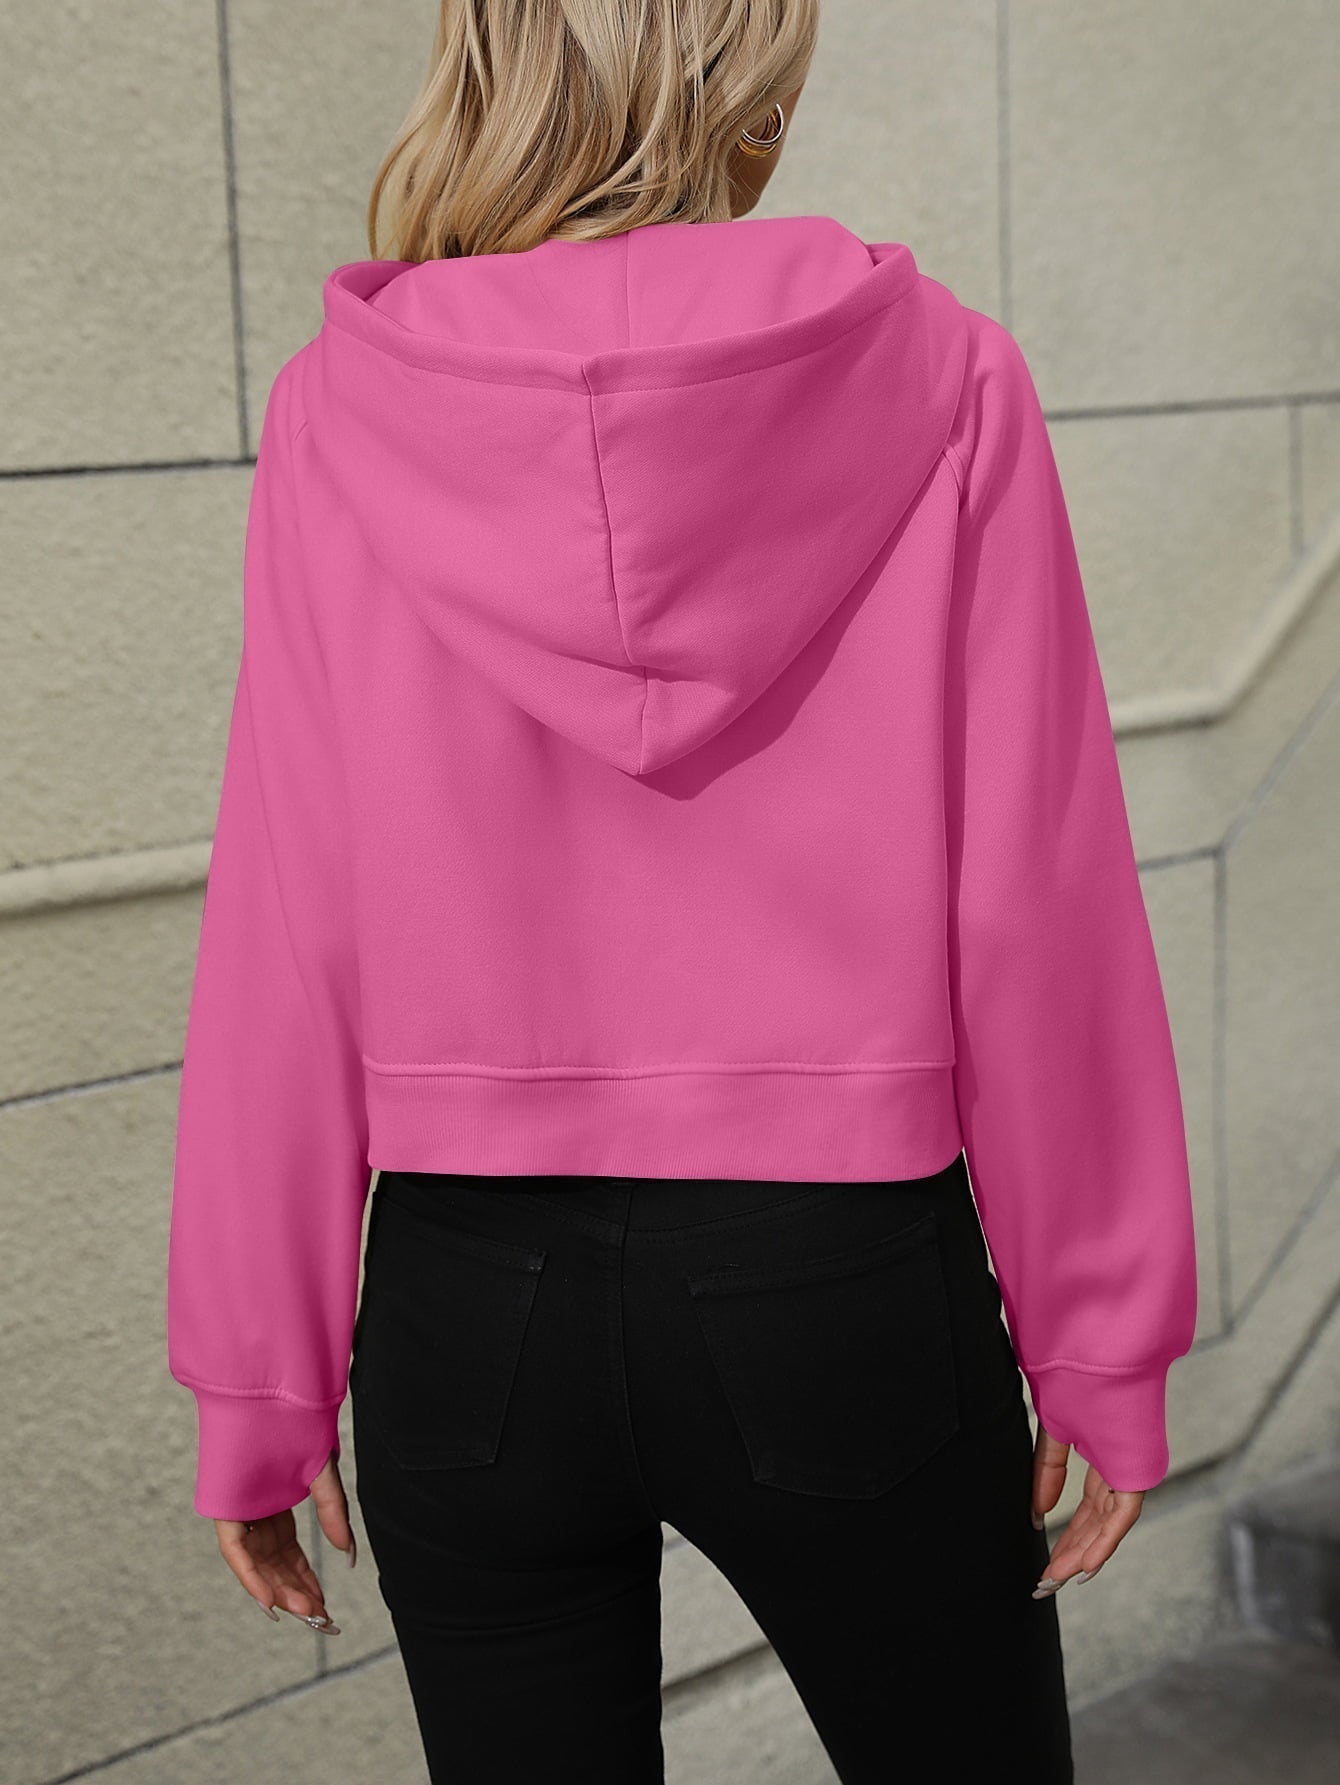 Raglan Sleeve Zip-Up Hoodie with Pocket Print on any thing USA/STOD clothes